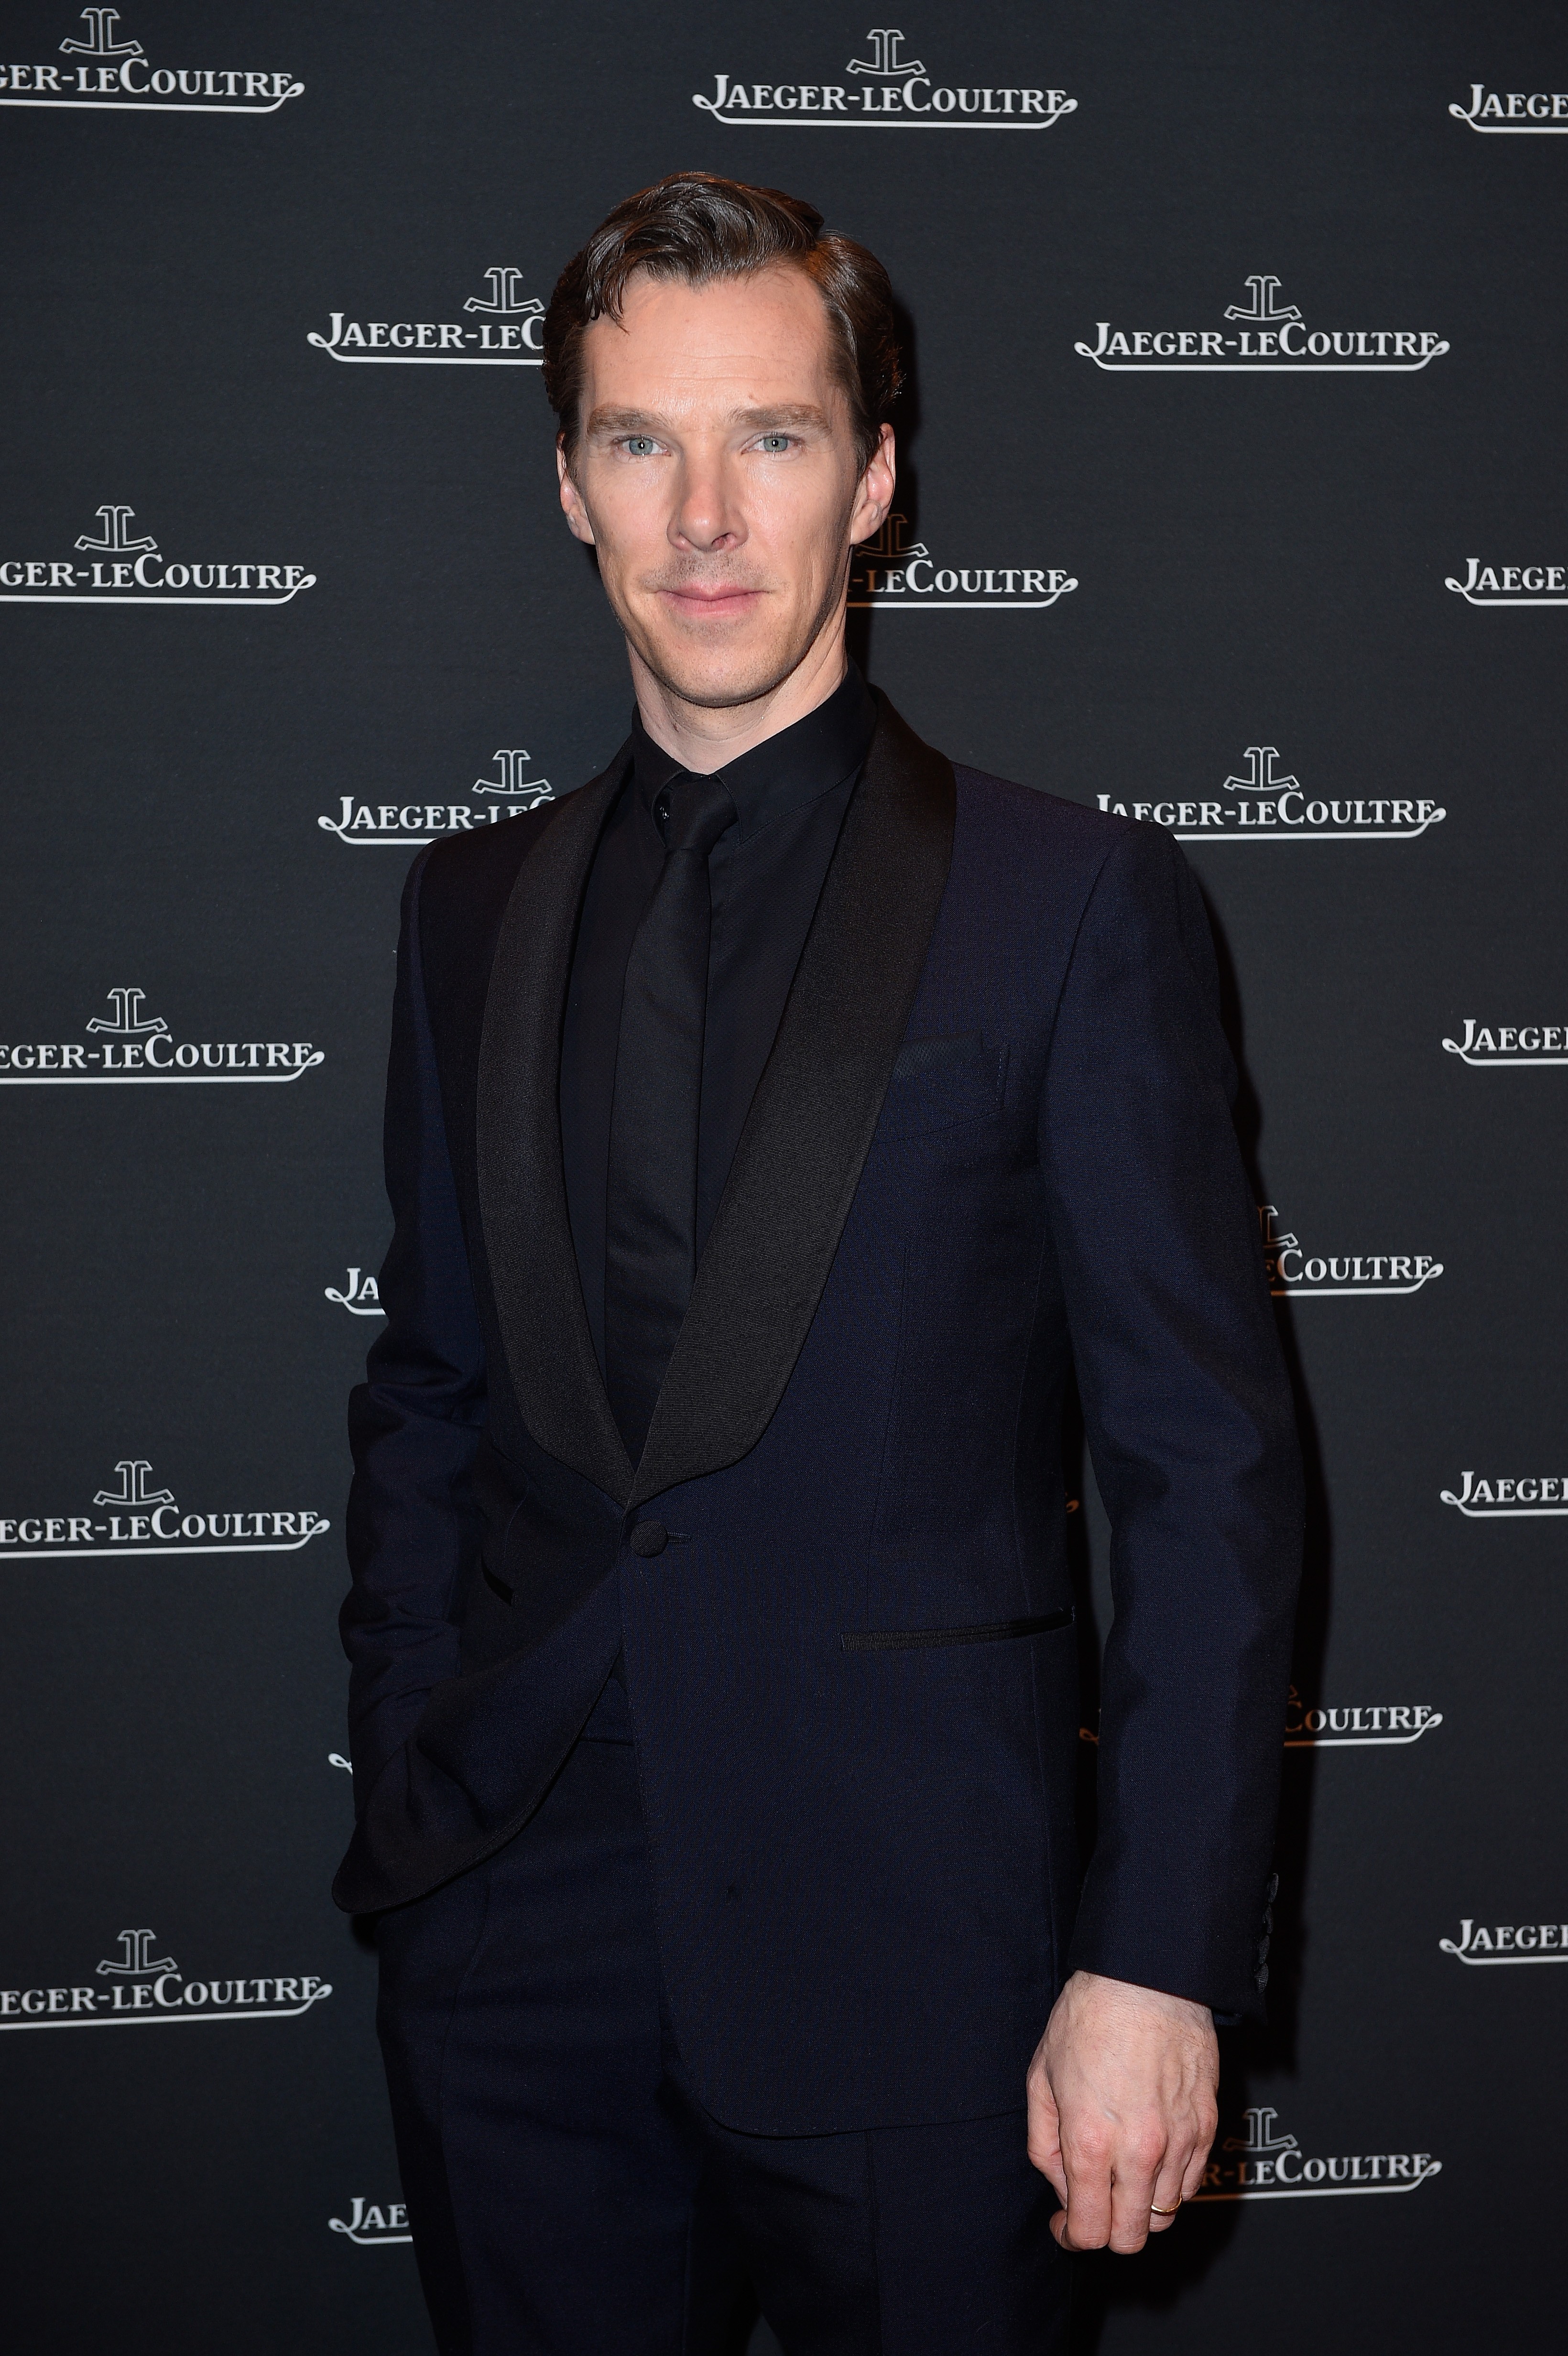 Benedict Cumberbatch came away empty handed from this year’s Golden Globes after being nominated for the award for best performance by an actor. Photo: Getty Images for Jaeger-LeCoultre